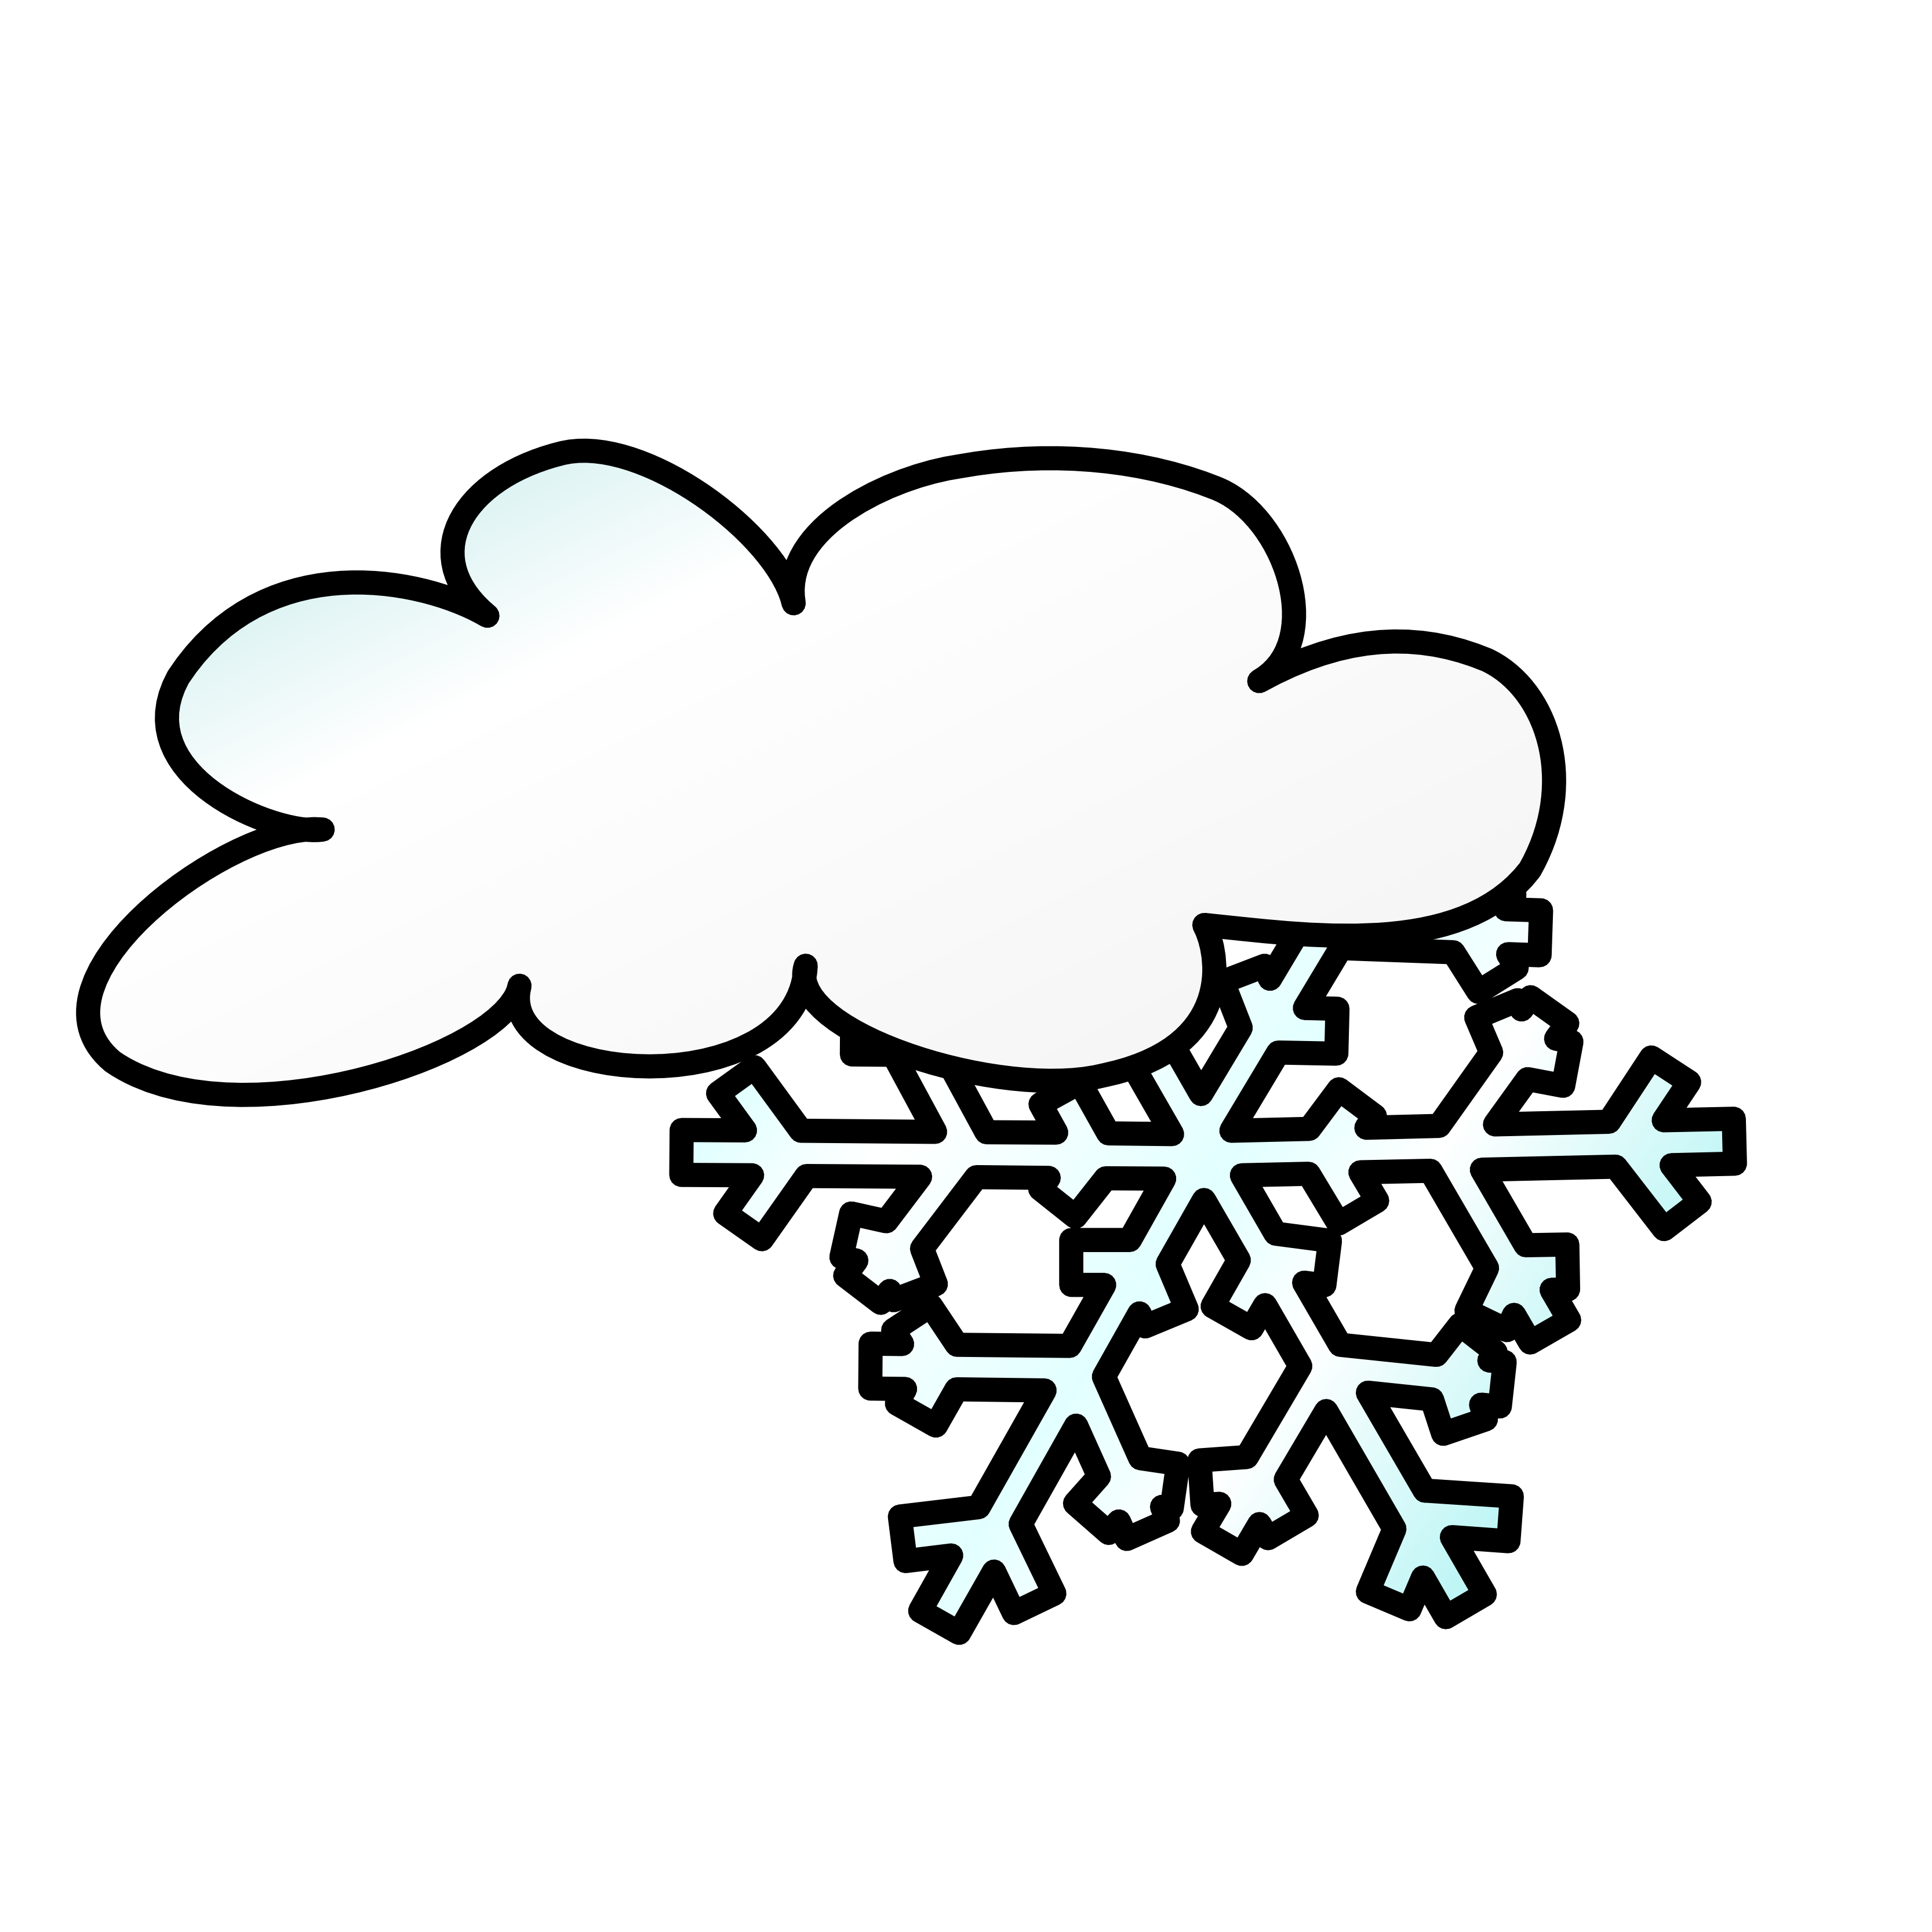 White partly cloudy day icon